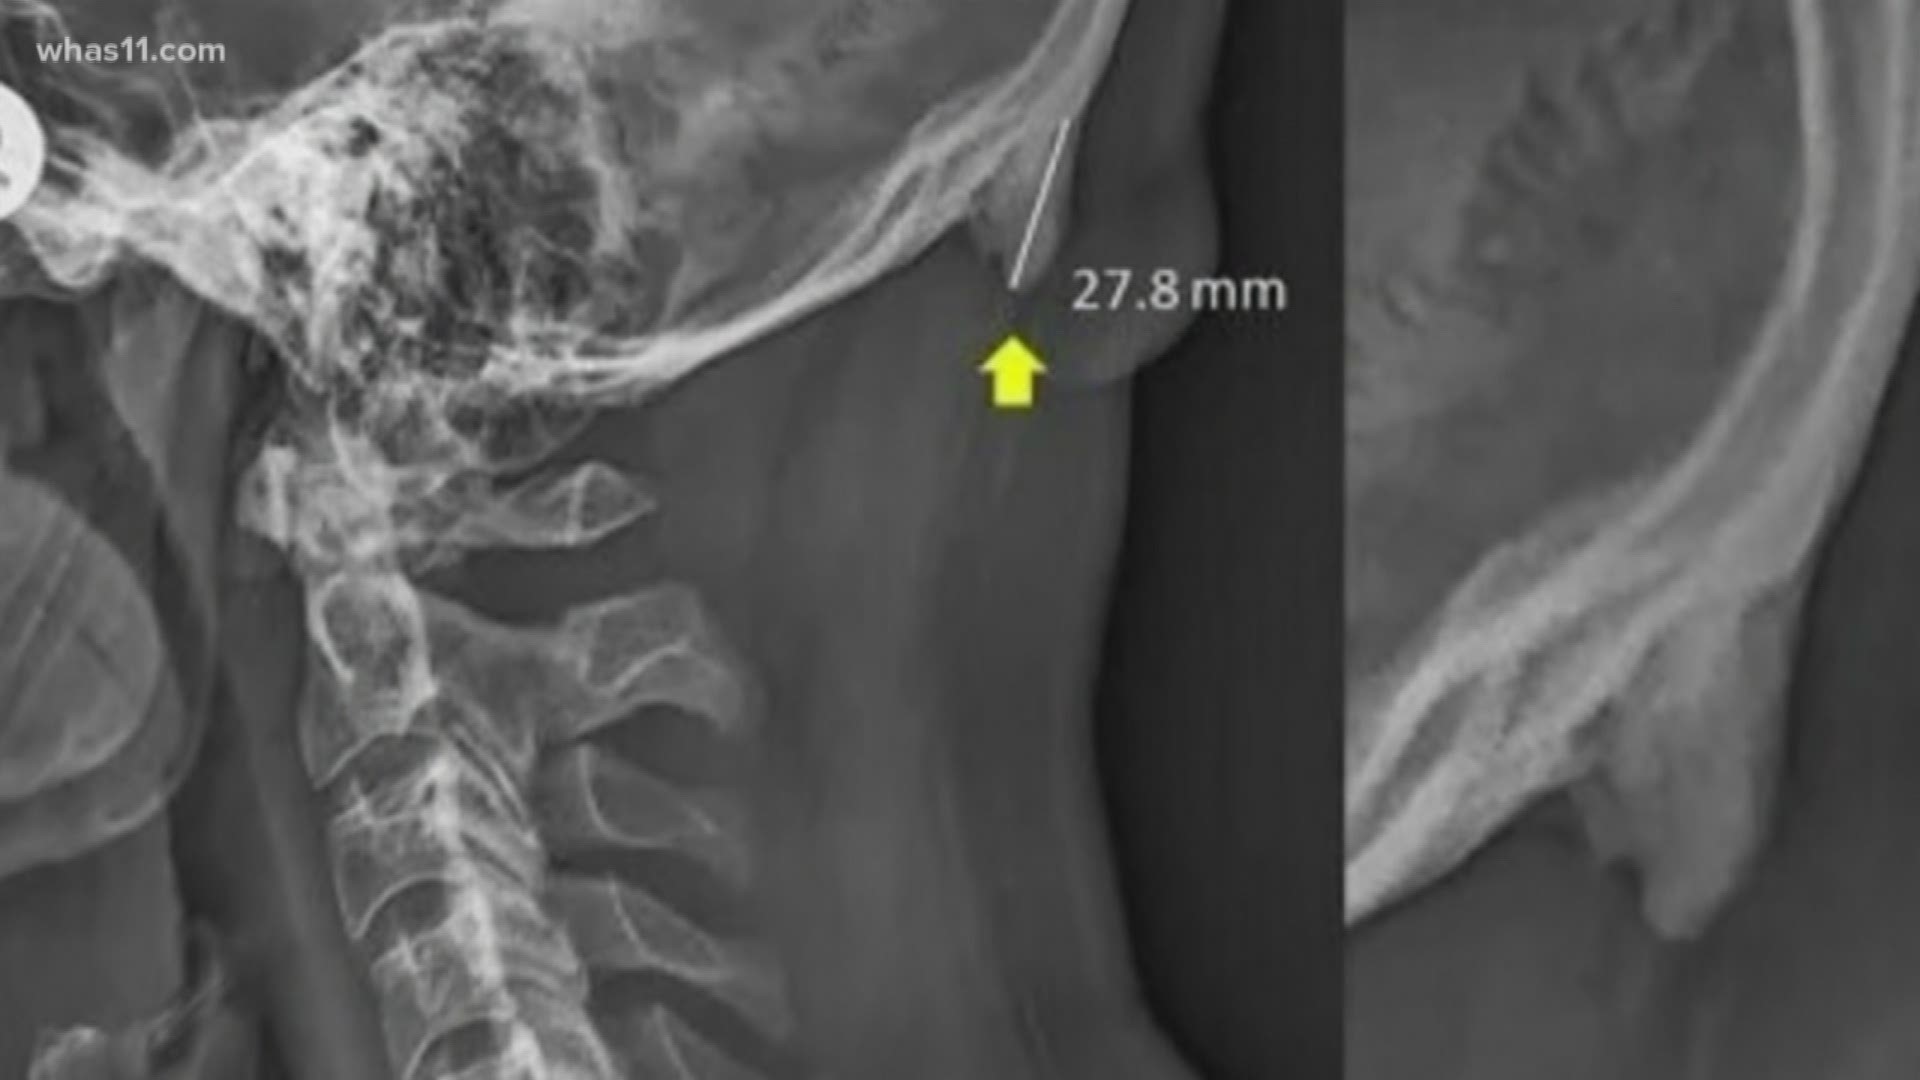 A 2018 study saw bony growths at the base of the skull in younger participants, but are these actually horns from cellphone use?